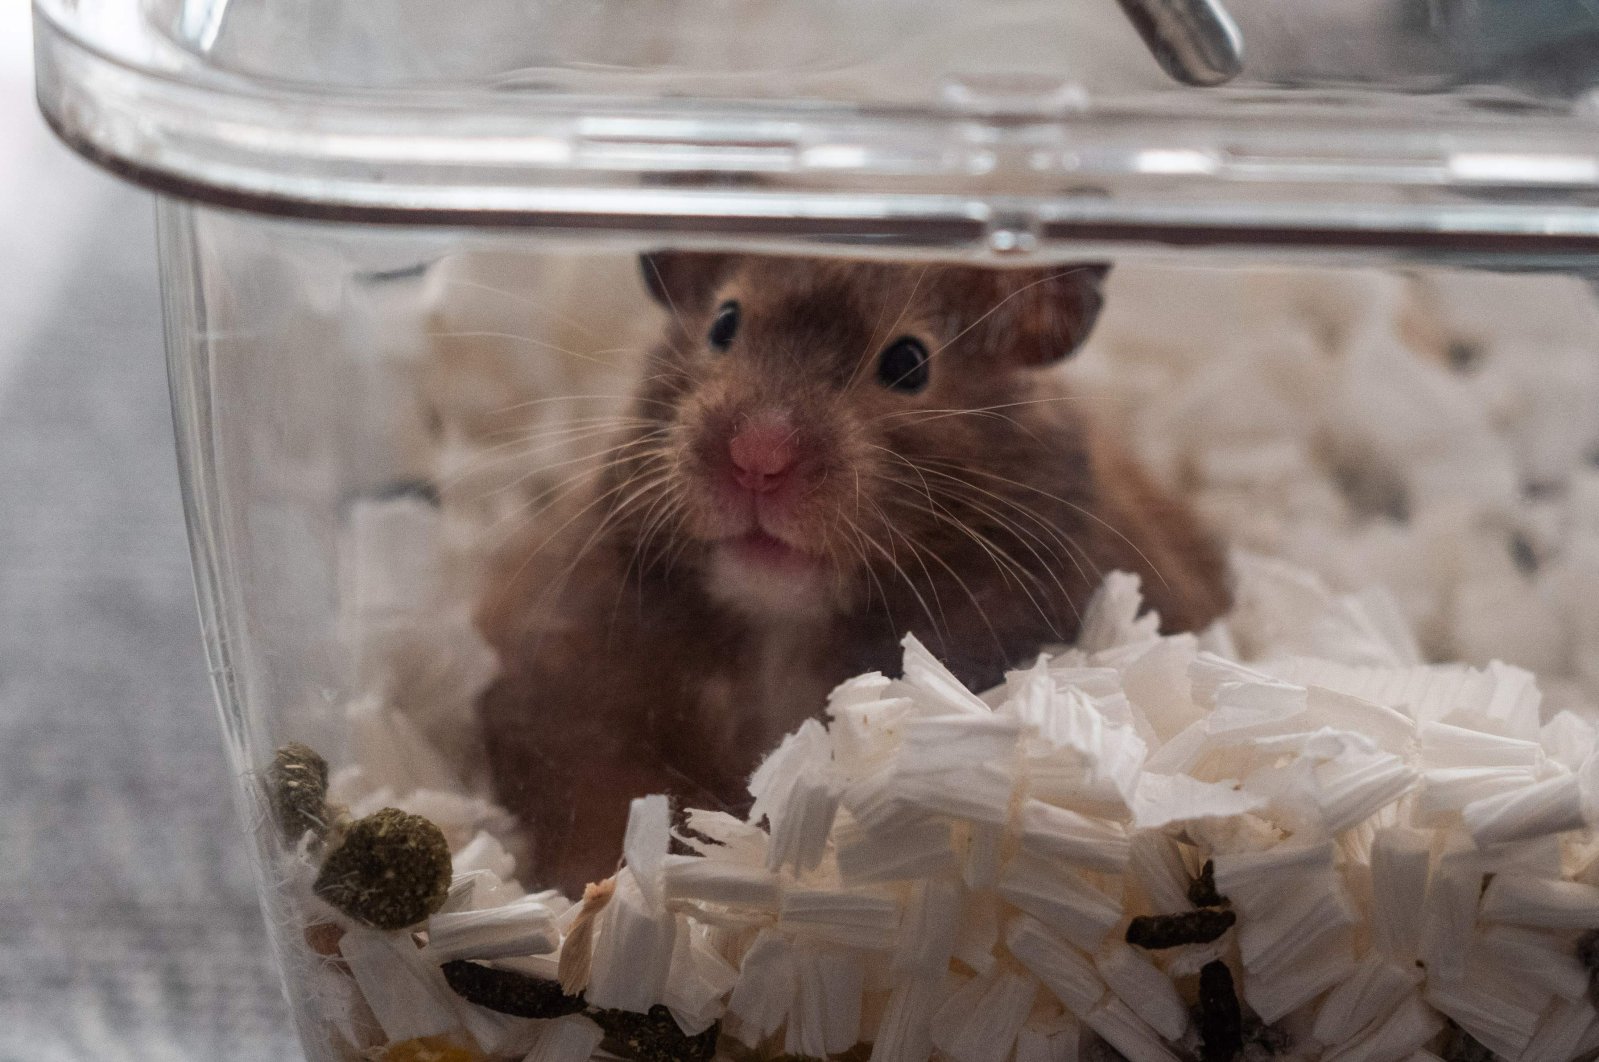 A 2-year-old hamster named "Ring" owned by Cheung, a member of an online hamster community who has volunteered to foster abandoned small animals in light of government instructions for pet owners to give up recently purchased hamsters, chinchillas, rabbits and guinea pigs for culling after hamsters in a pet store tested positive for Covid-19, looks on from a cage in Hong Kong, Jan. 19, 2022. (AFP Photo)